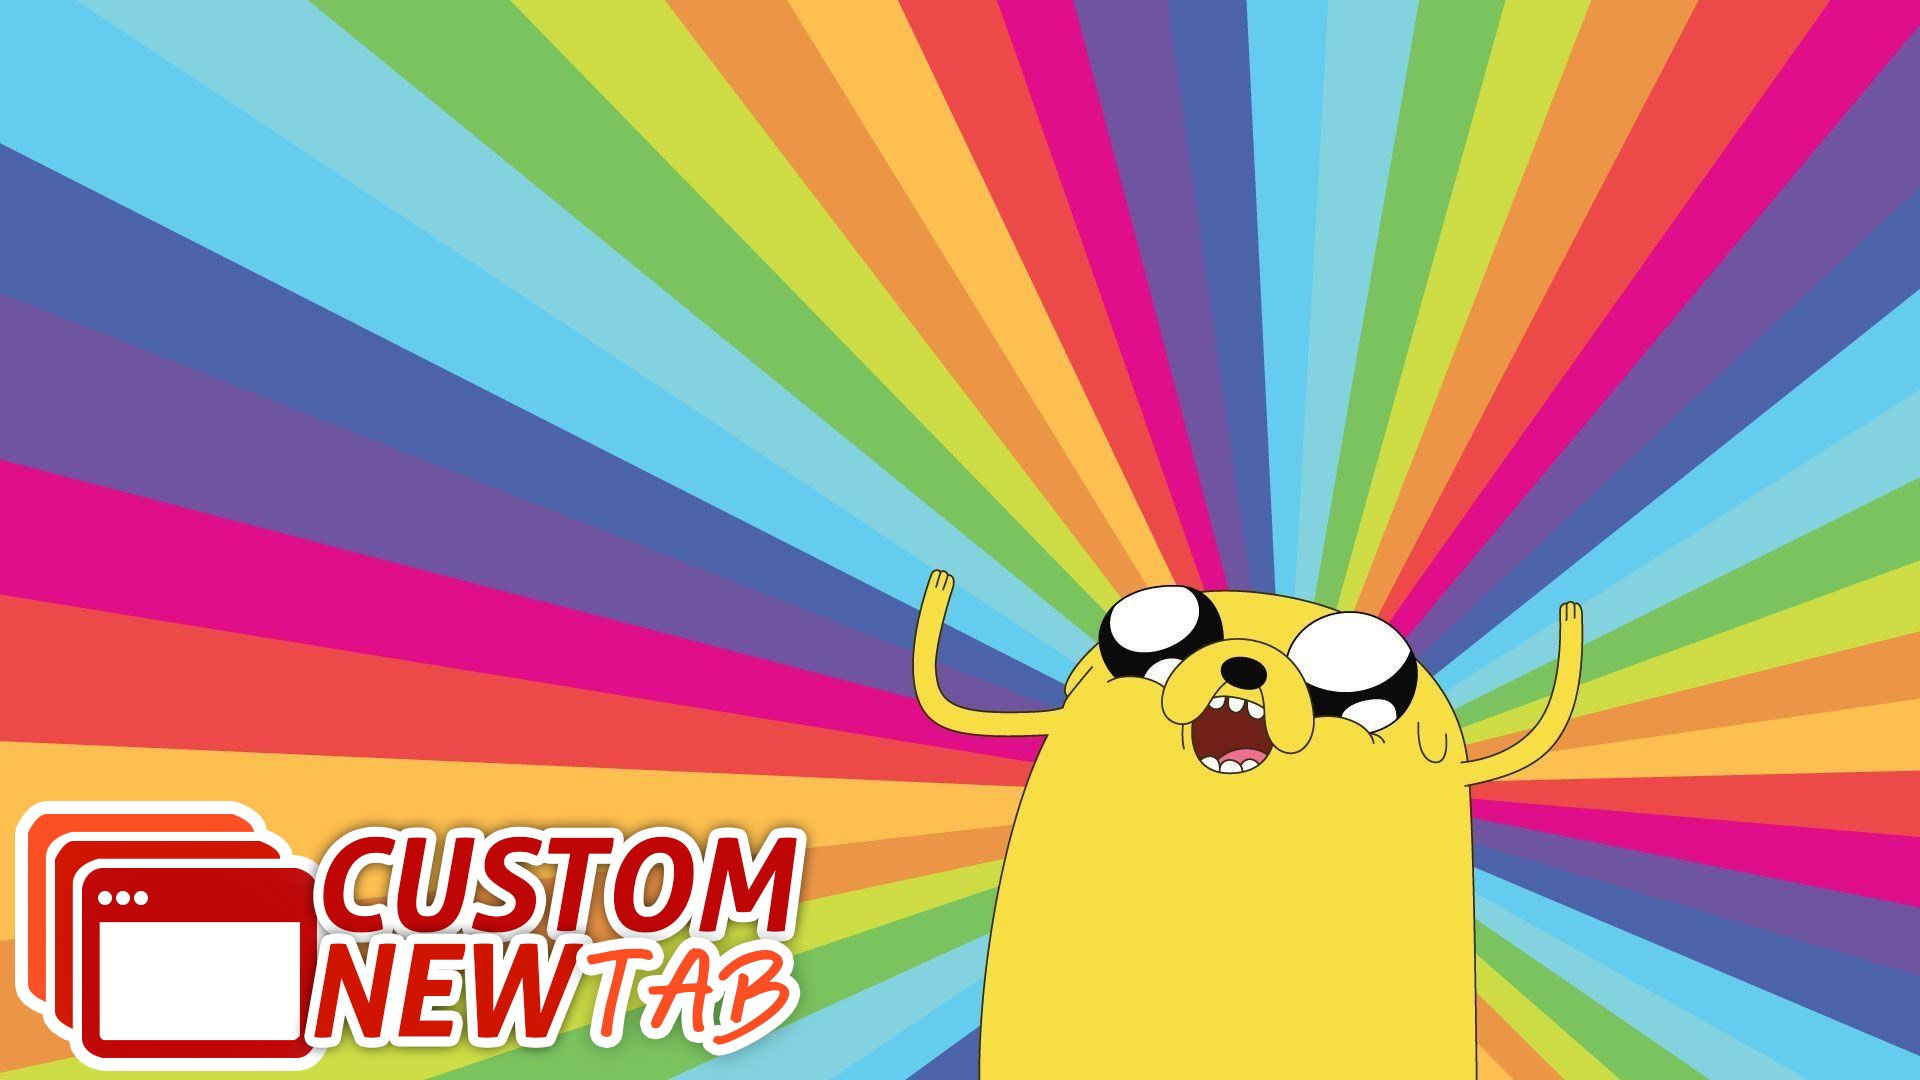 Adventure Time , HD Wallpaper & Backgrounds